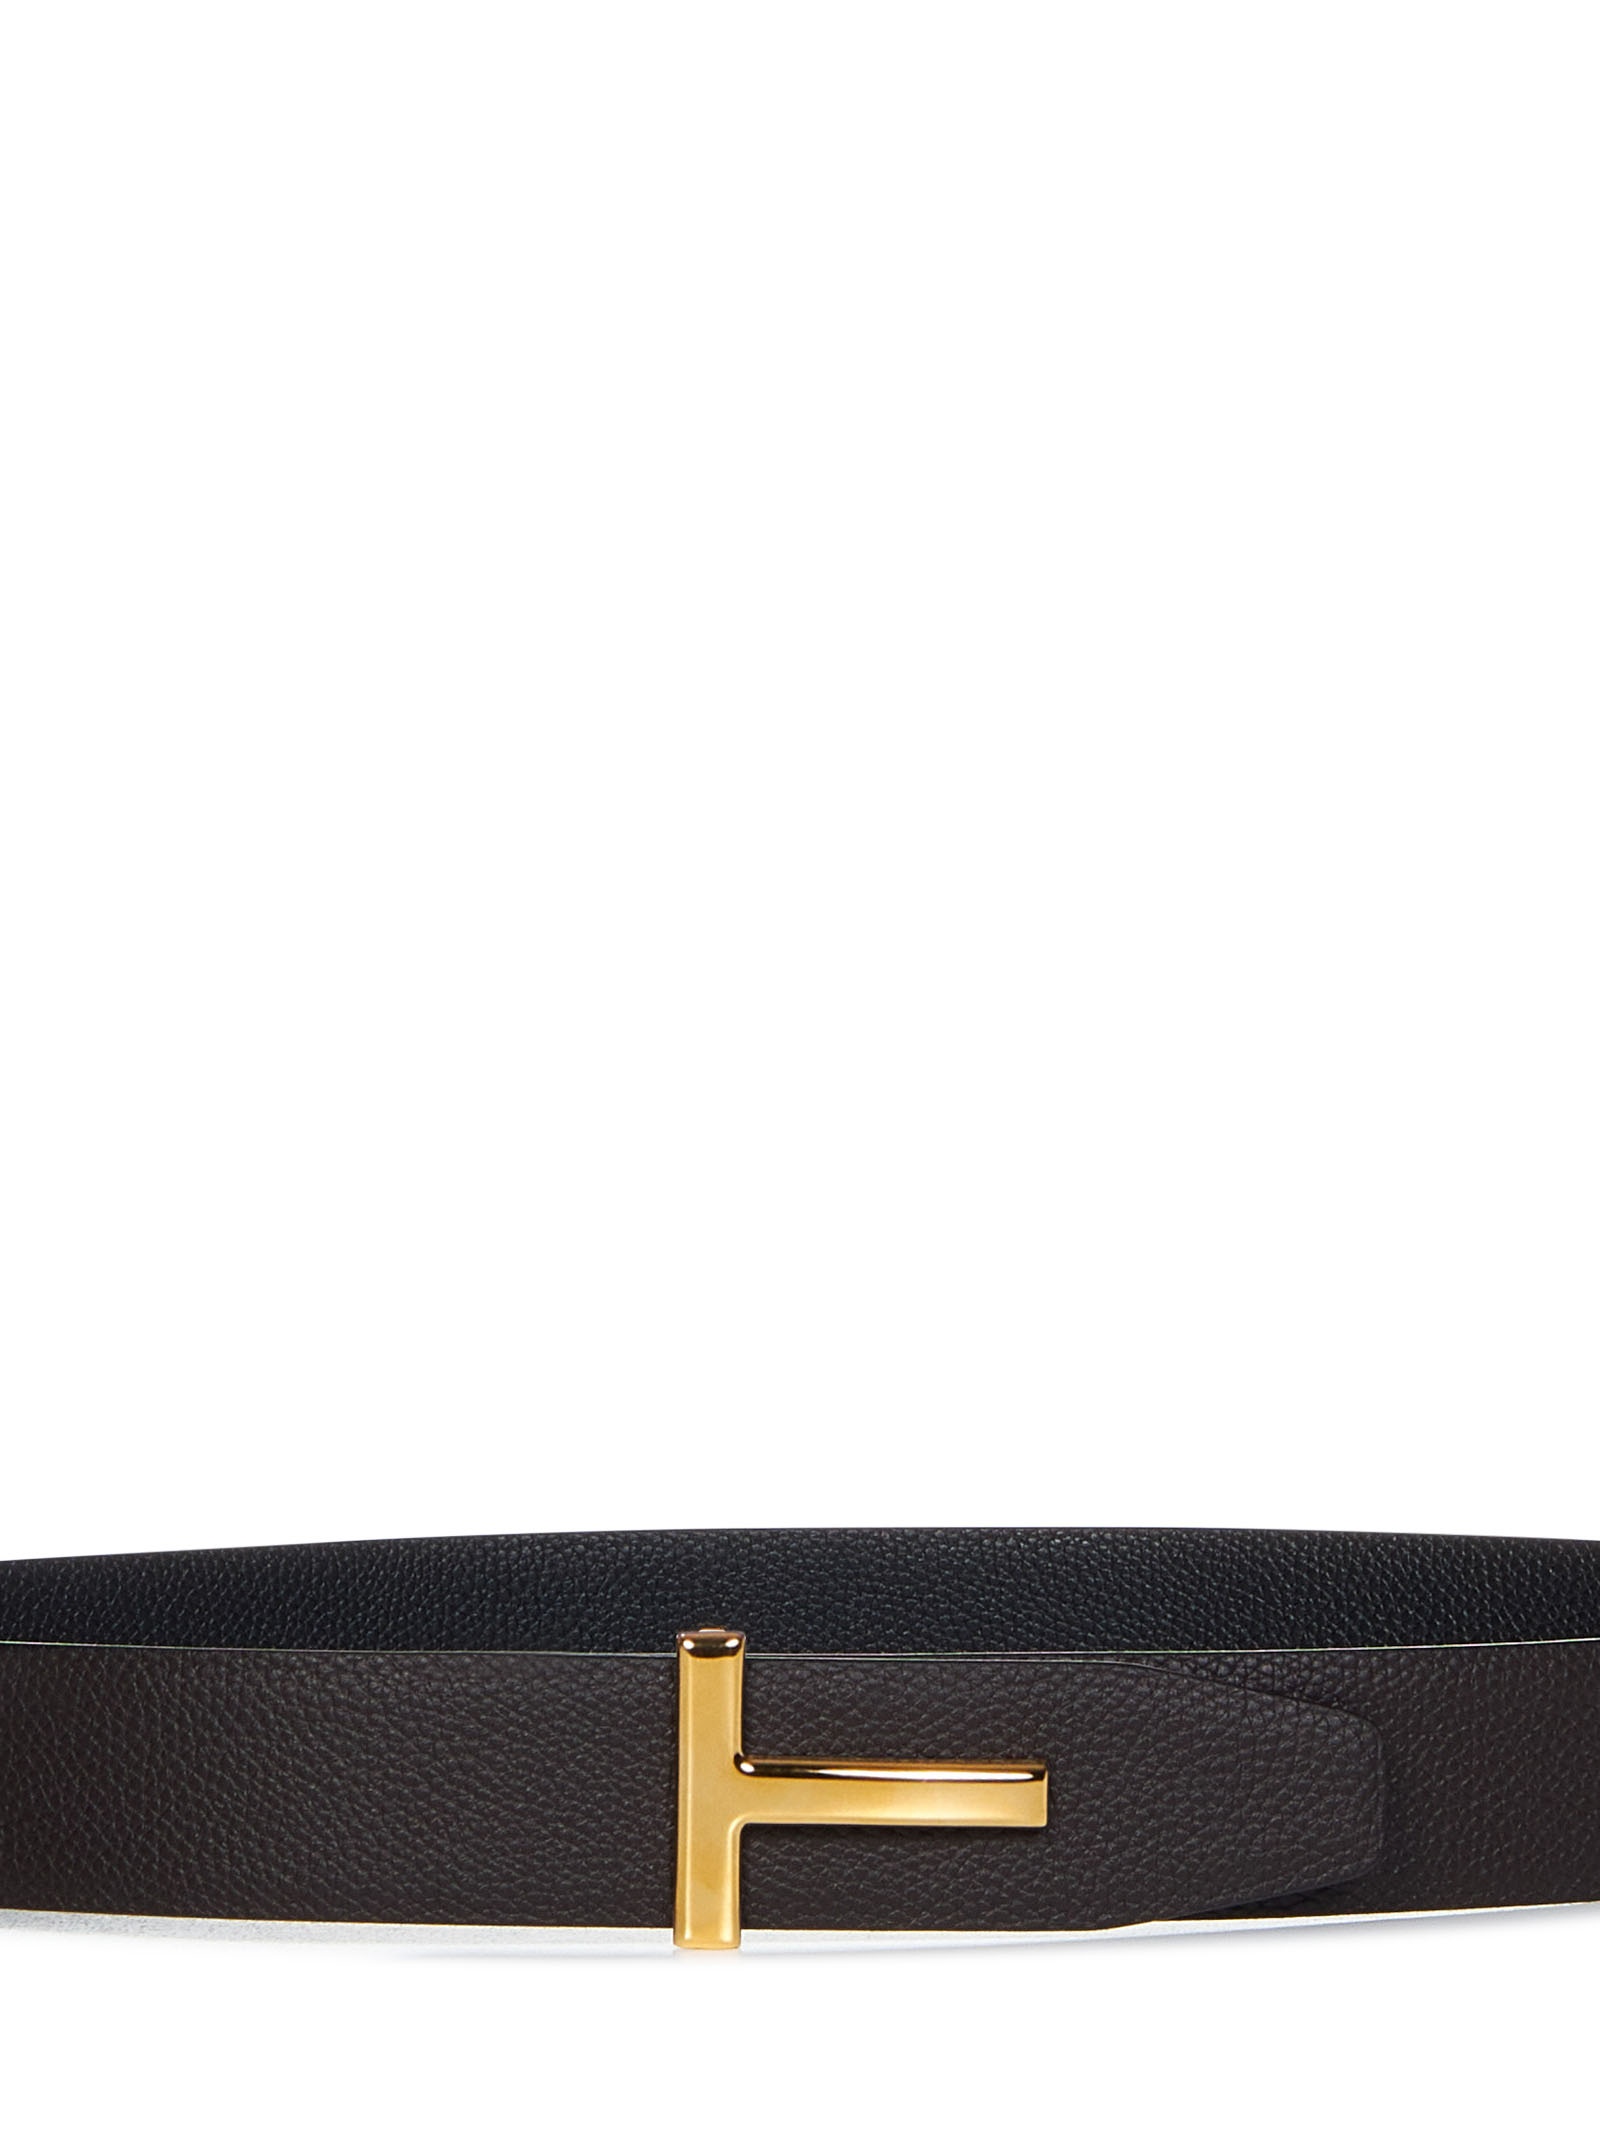 Reversible brown and black grained calf leather belt with T-shaped buckle. - 2